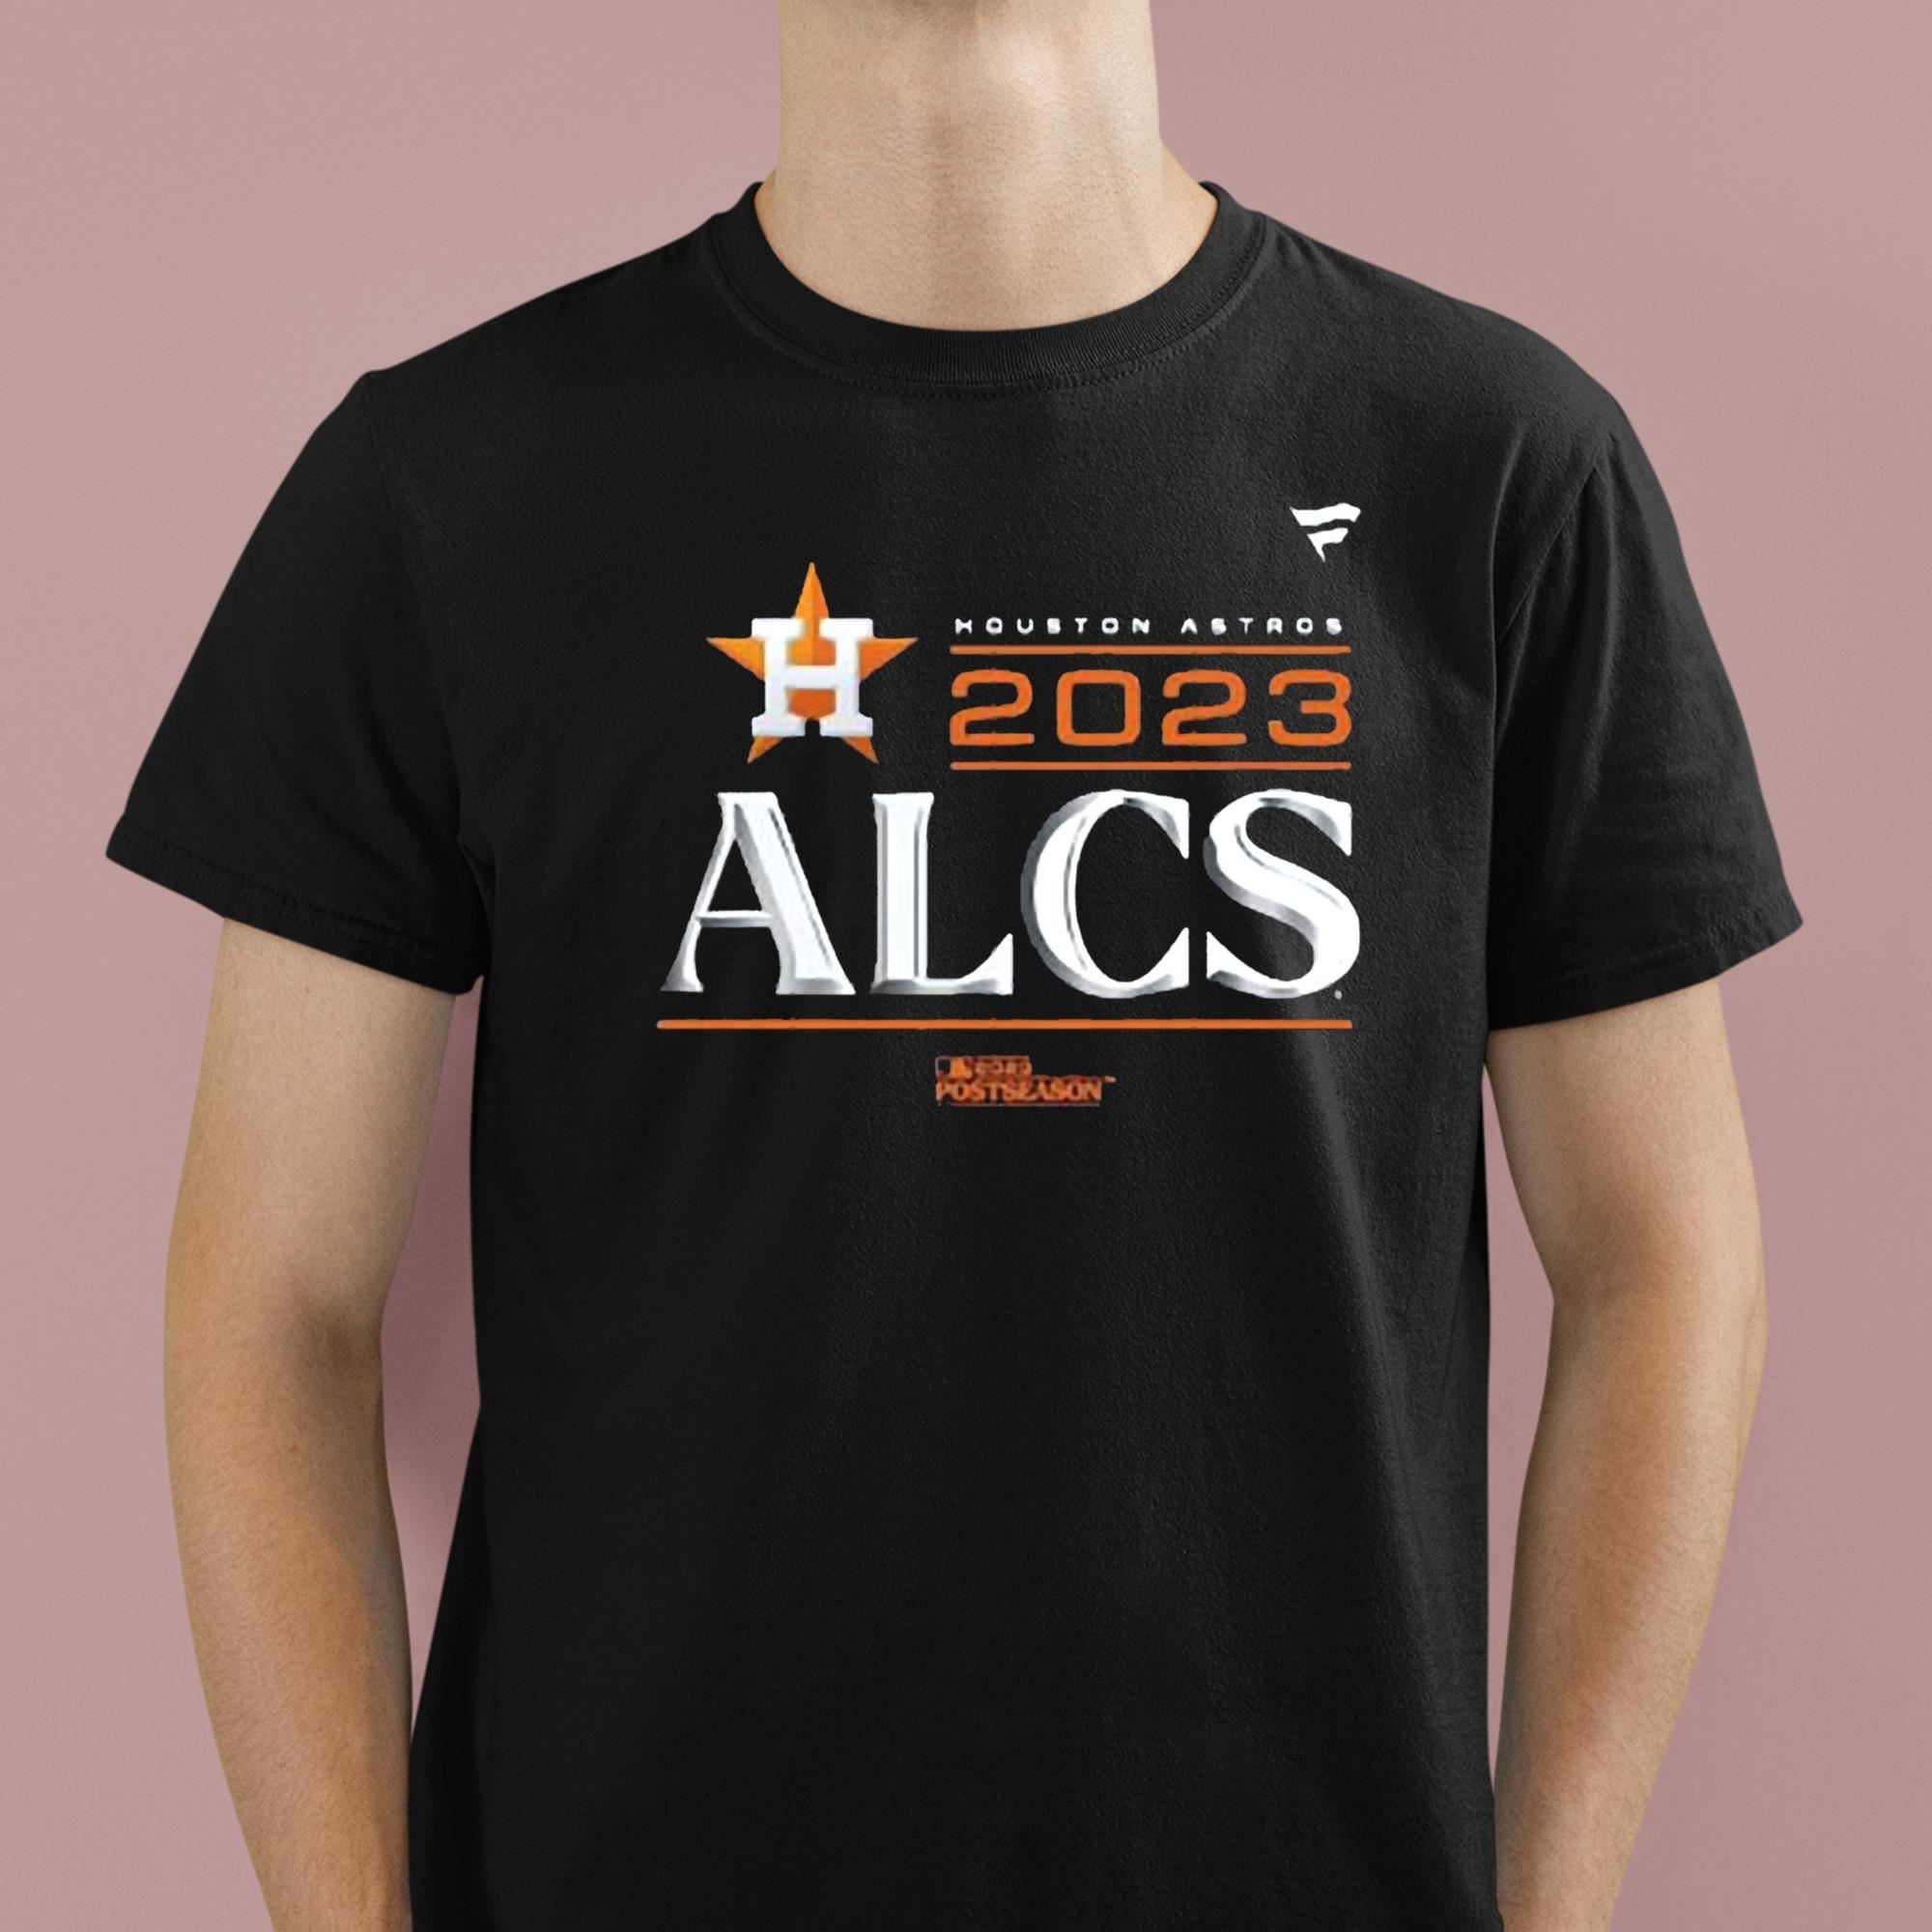 astros fathers day shirt